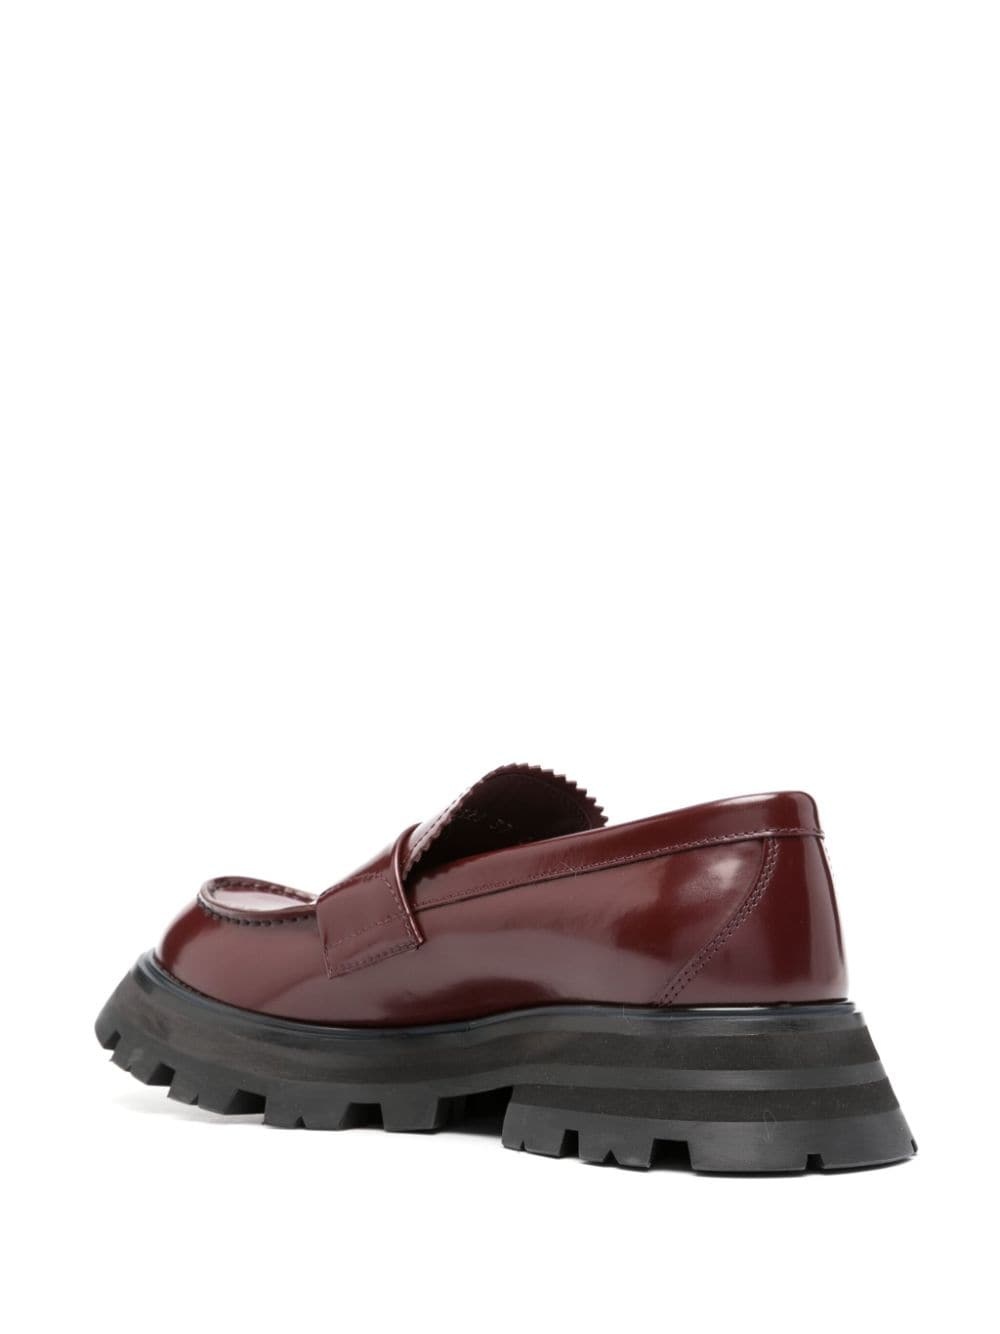 ridged-sole leather loafers - 3